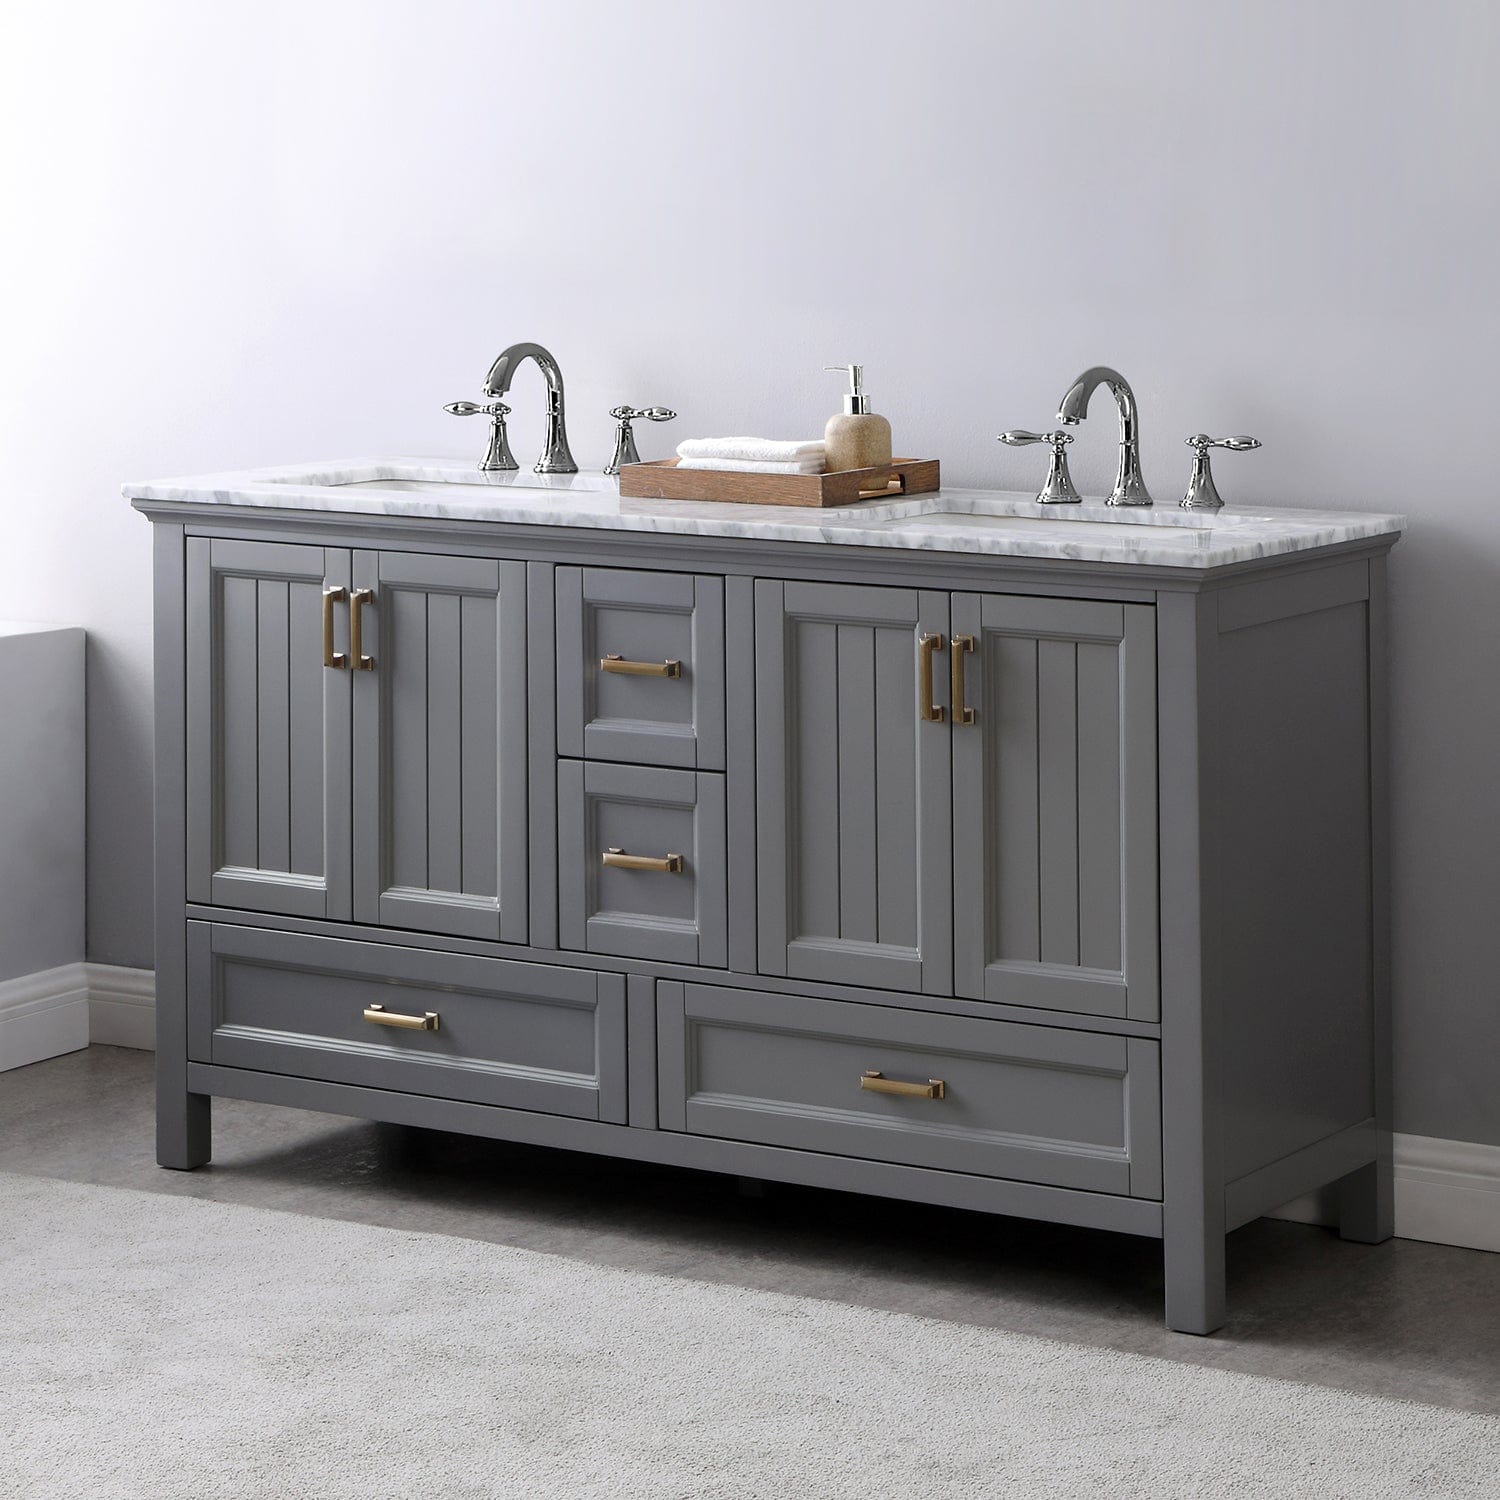 Altair Isla 60" Double Bathroom Vanity Set in Gray and Carrara White Marble Countertop without Mirror 538060-GR-CA-NM - Molaix631112970907Vanity538060-GR-CA-NM